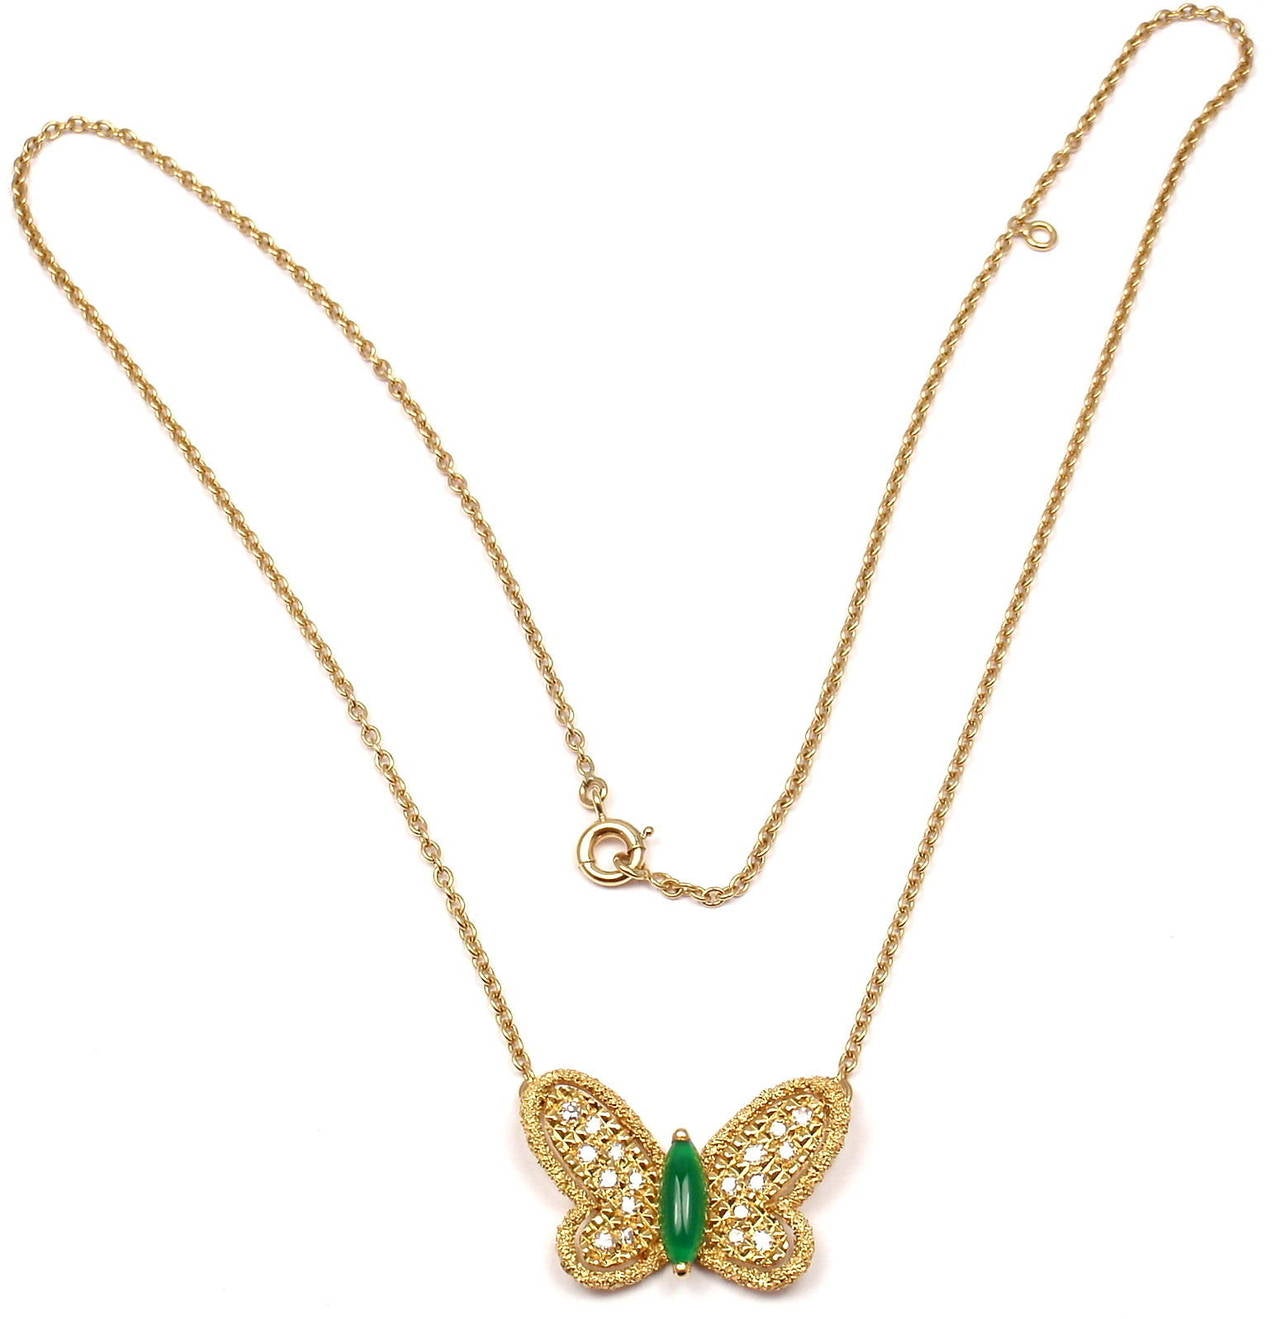 18k Yellow Gold Diamond Chalcedony Butterfly Necklace by Van Cleef & Arpels. This necklace is from Van Cleef & Arpels' 1976 bufferfly collection. 
With 1 marquise shaped chalcedony stone. And 18 diamonds, VS1 clarity, G color. Total Diamond Weight: